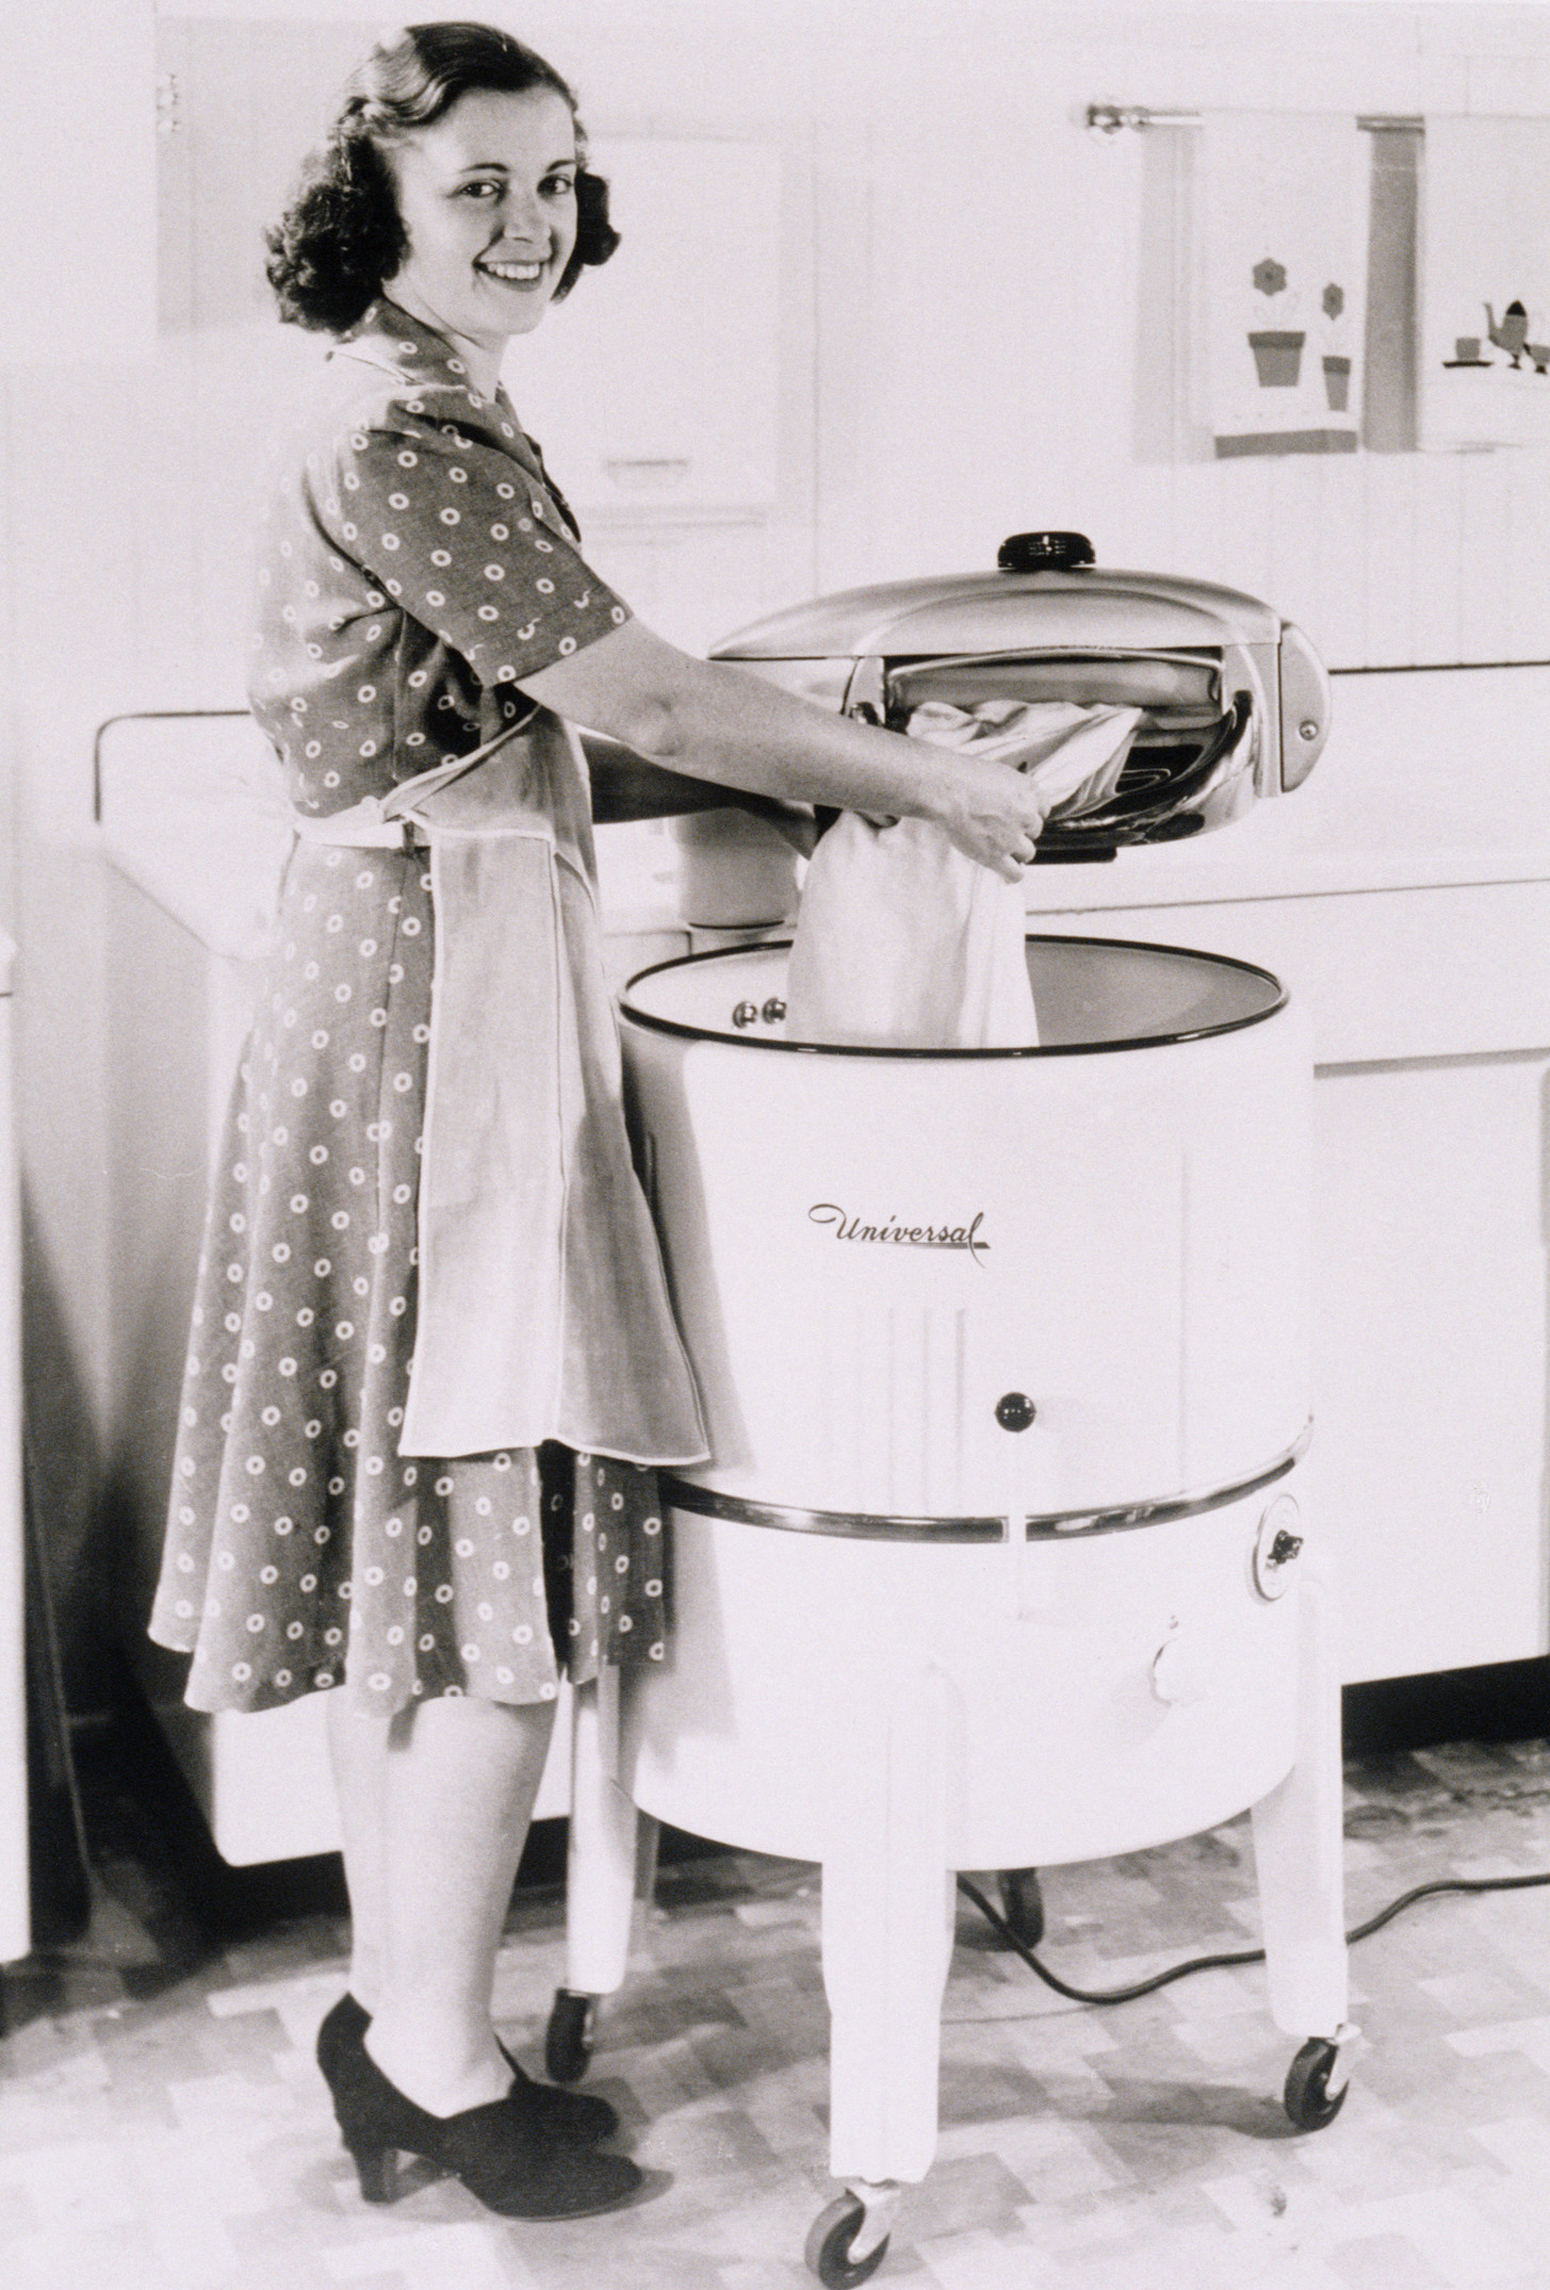 vintage photo of 50s housewife doing laundry